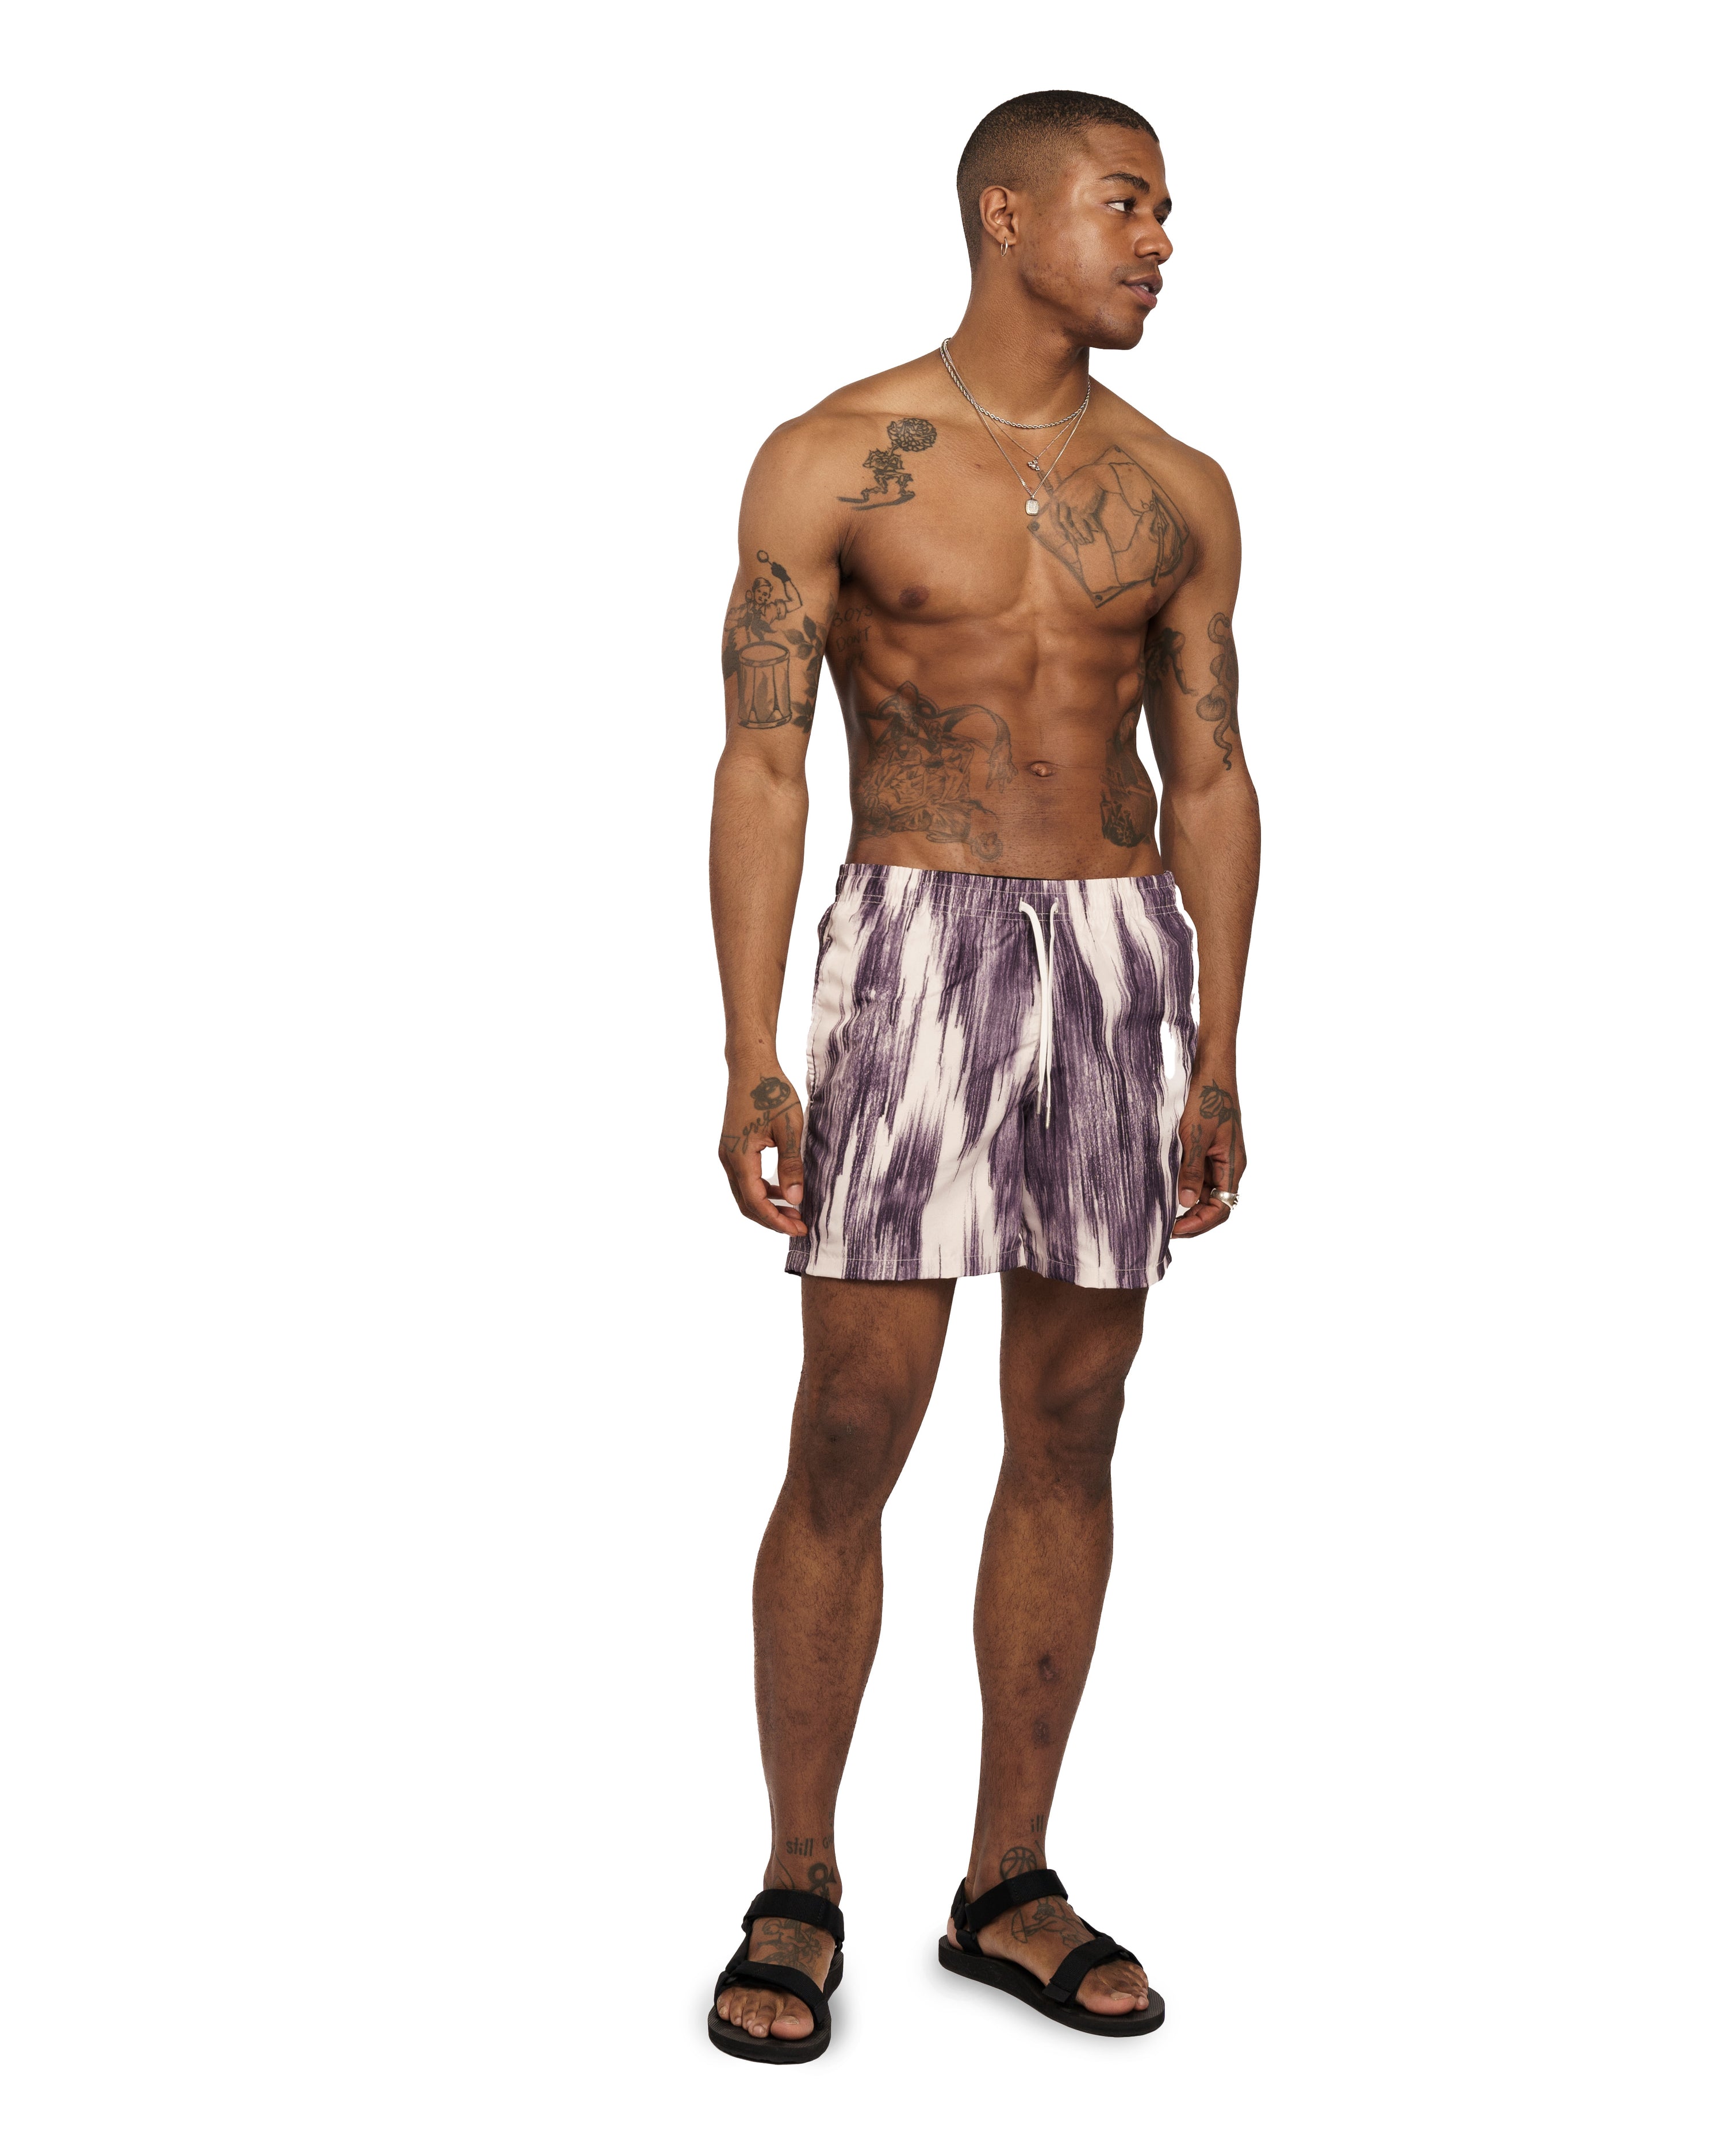 model view of purple and white Bather swim trunk with a color clashing pattern